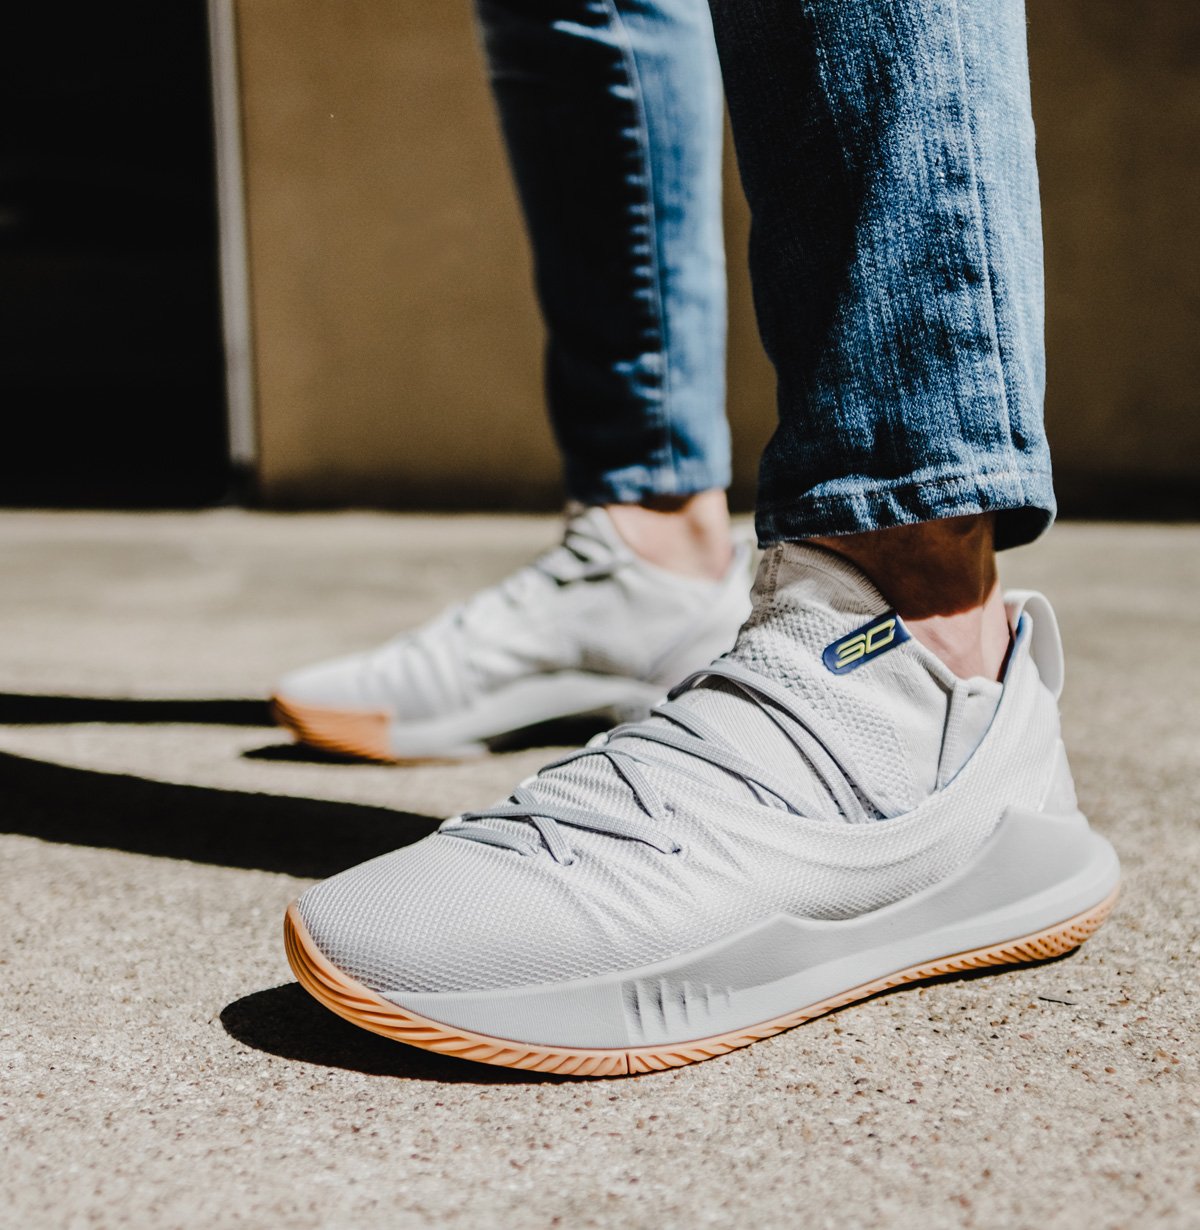 Under Armour Curry 5 In Grey / Gum 